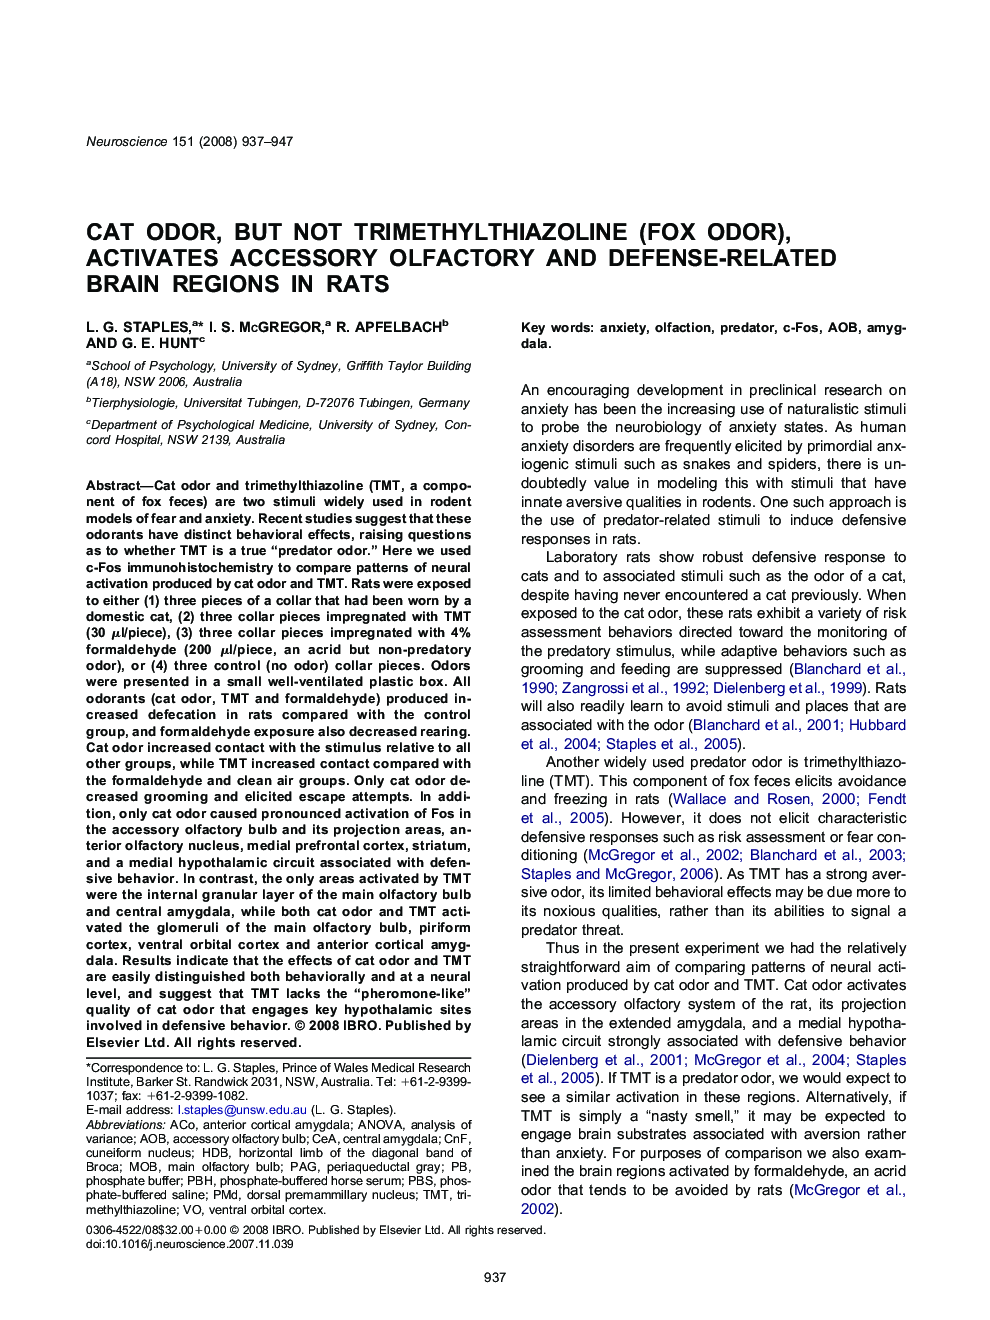 Cat odor, but not trimethylthiazoline (fox odor), activates accessory olfactory and defense-related brain regions in rats